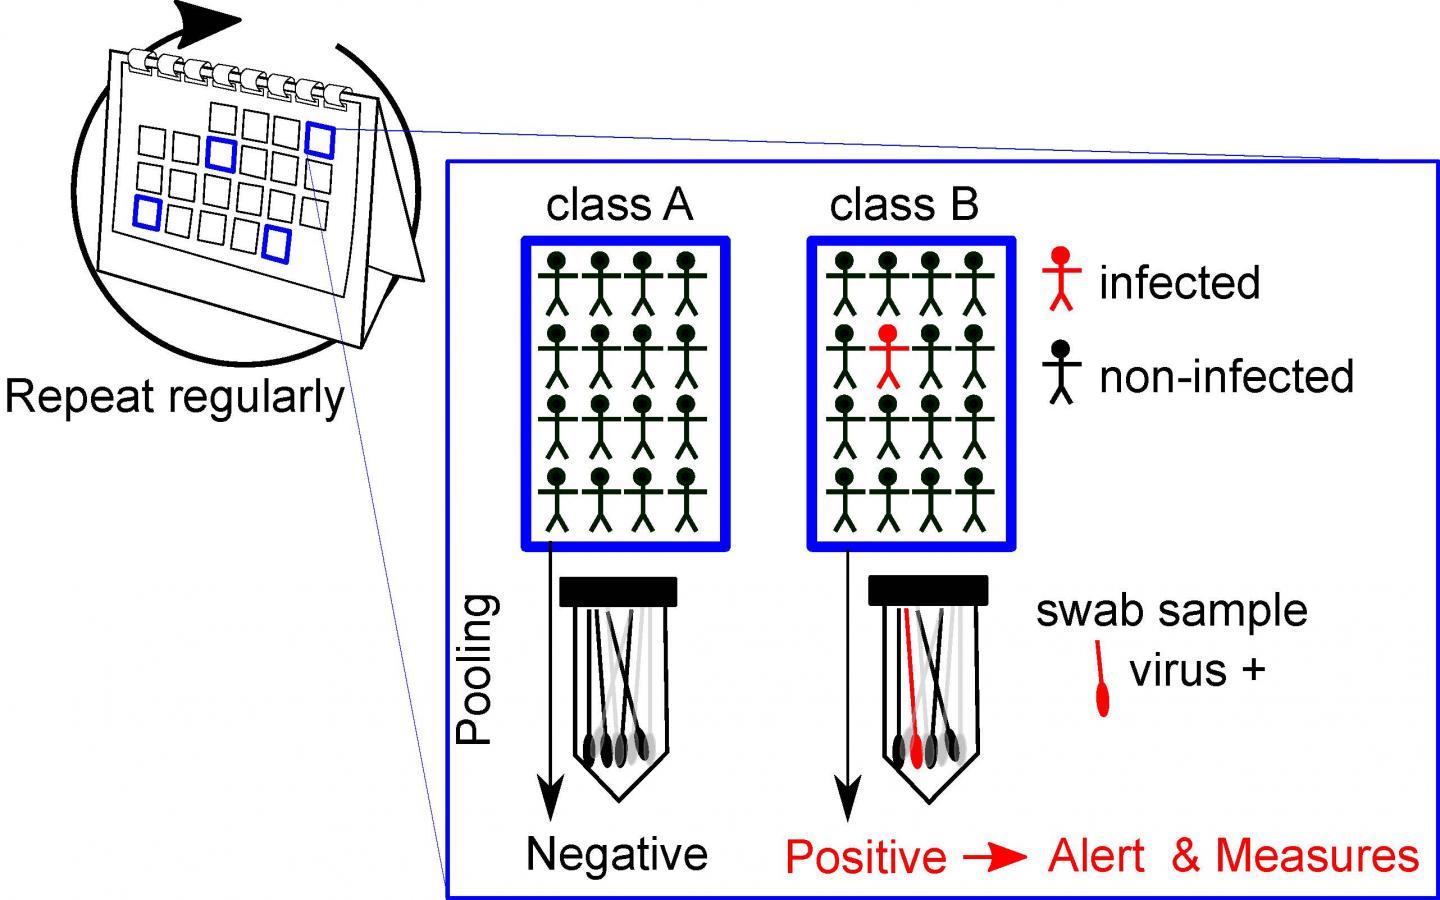 A New Strategy for Pooling COVID-19 Tests to Detect Outbreaks Early